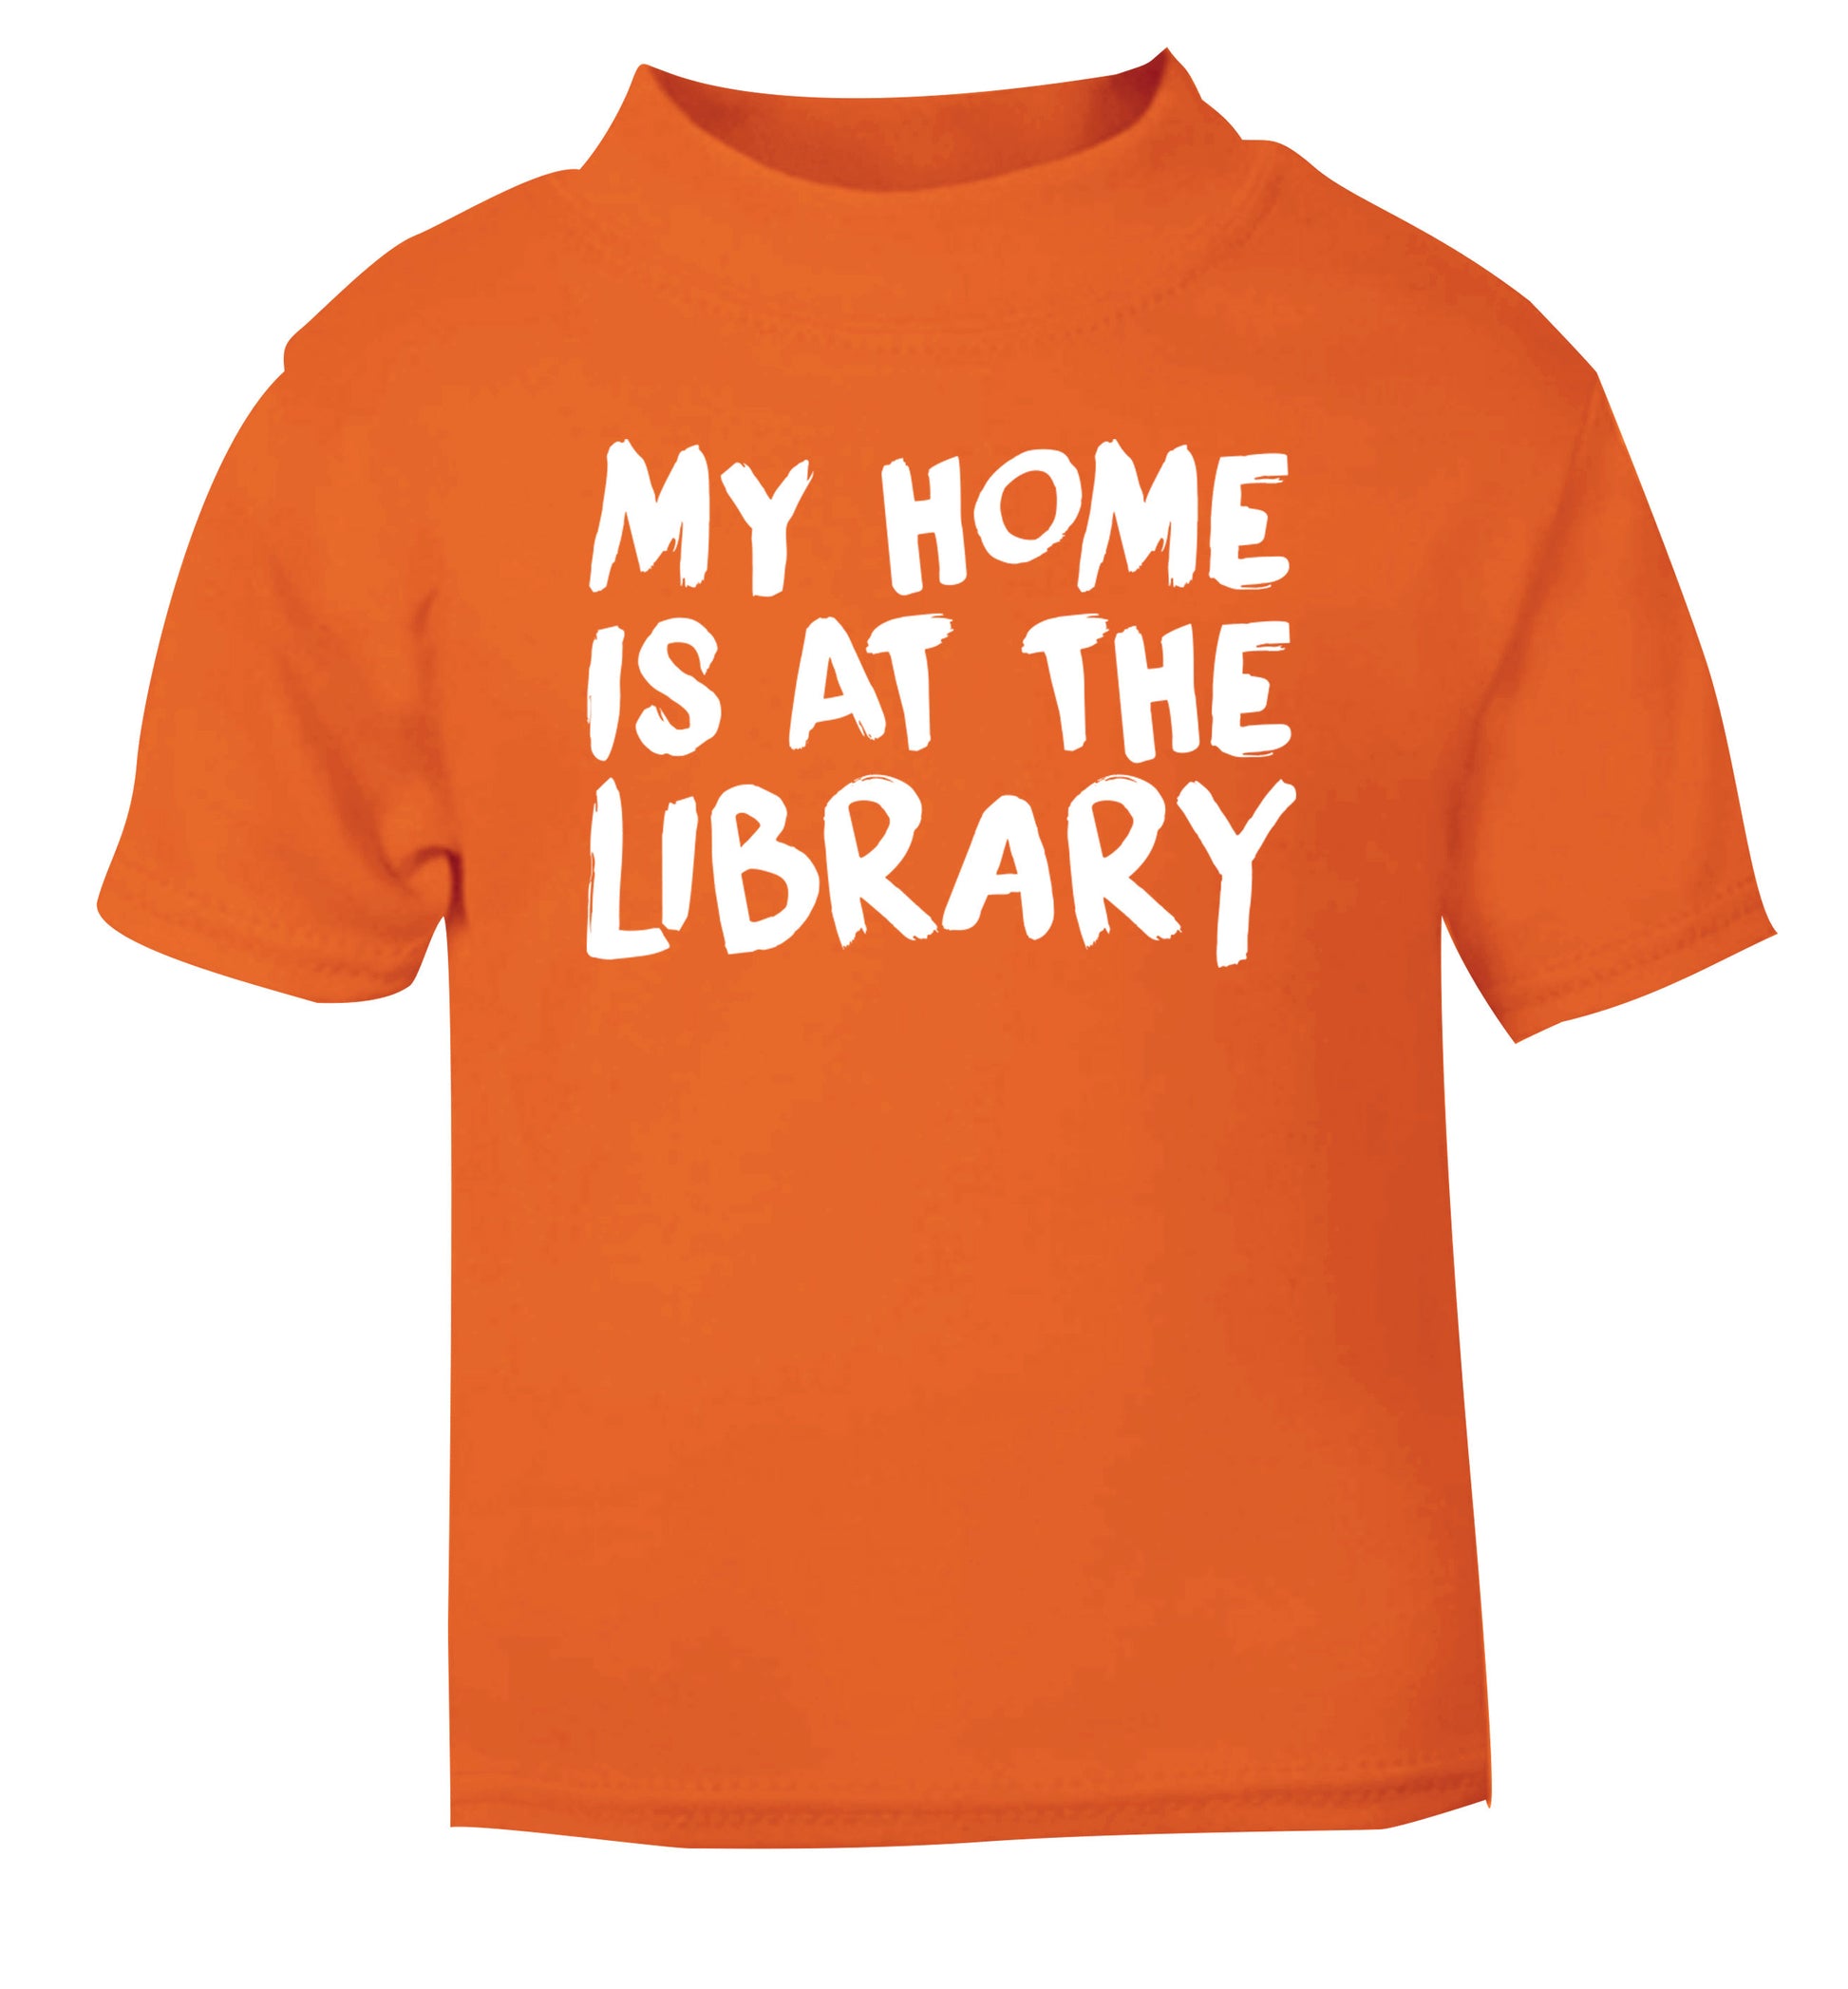 My home is at the library orange Baby Toddler Tshirt 2 Years